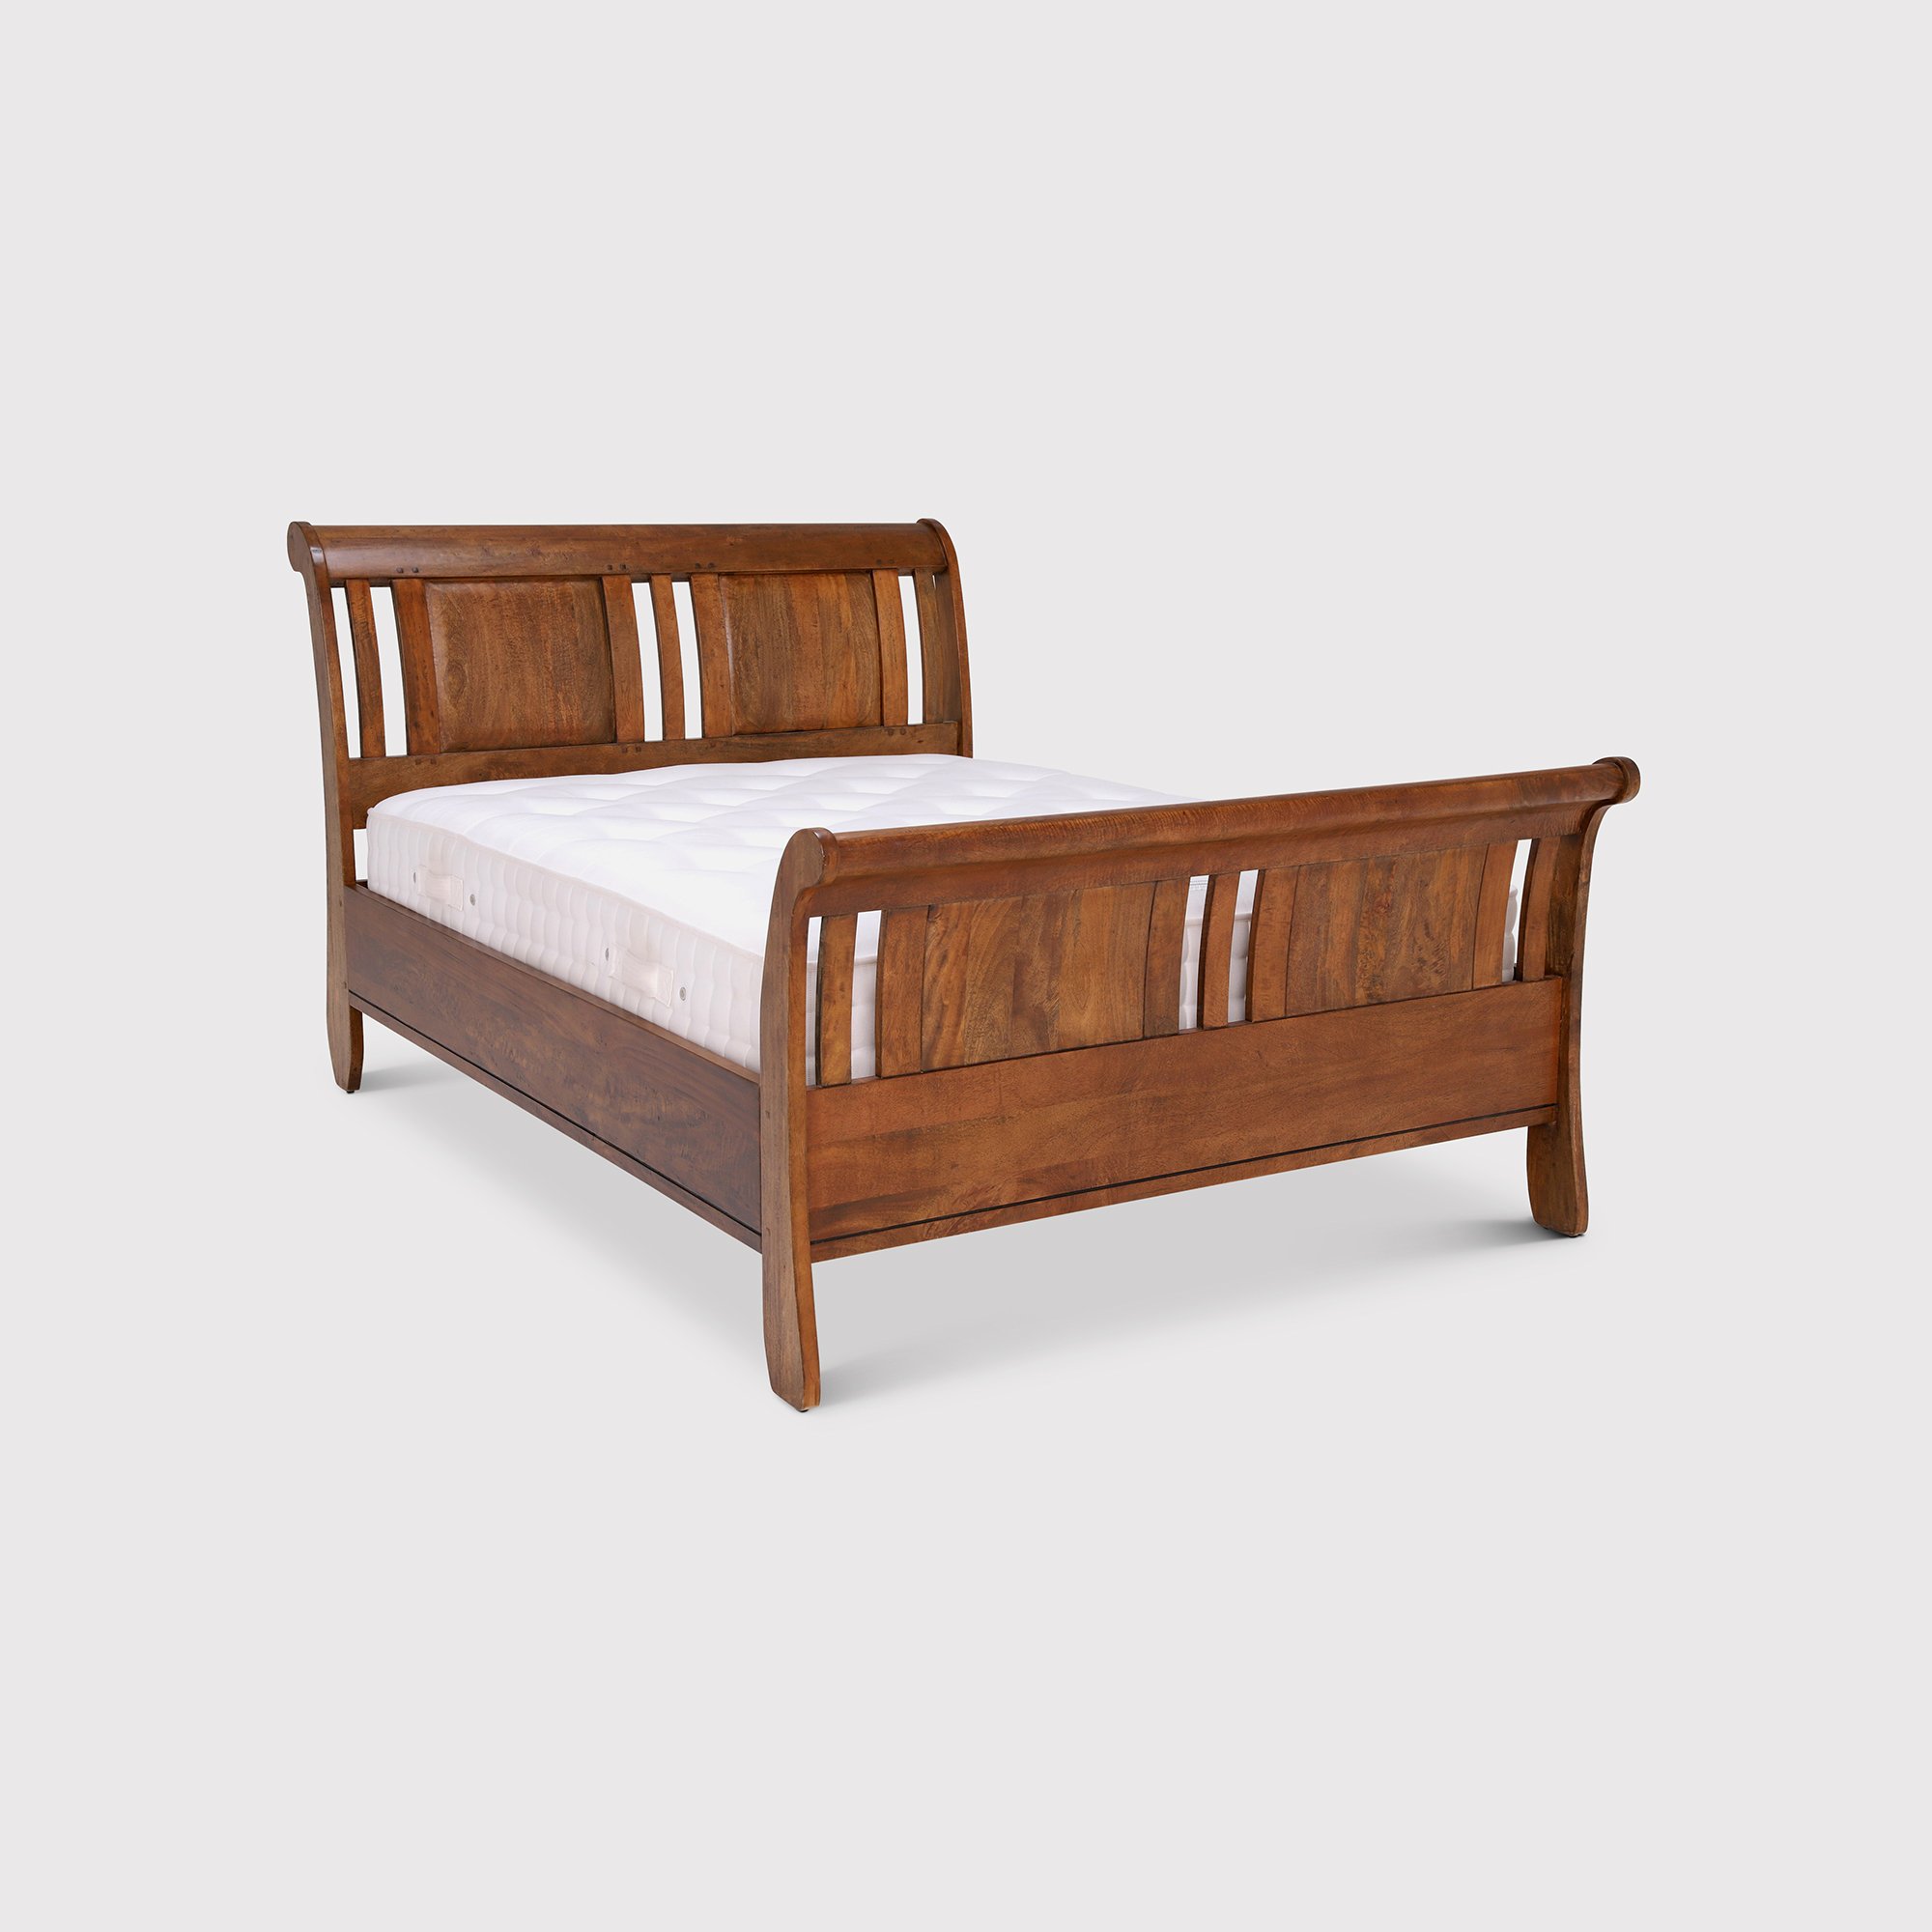 New Frontier 135cm Sleigh Bed, Wood | Double | Barker & Stonehouse